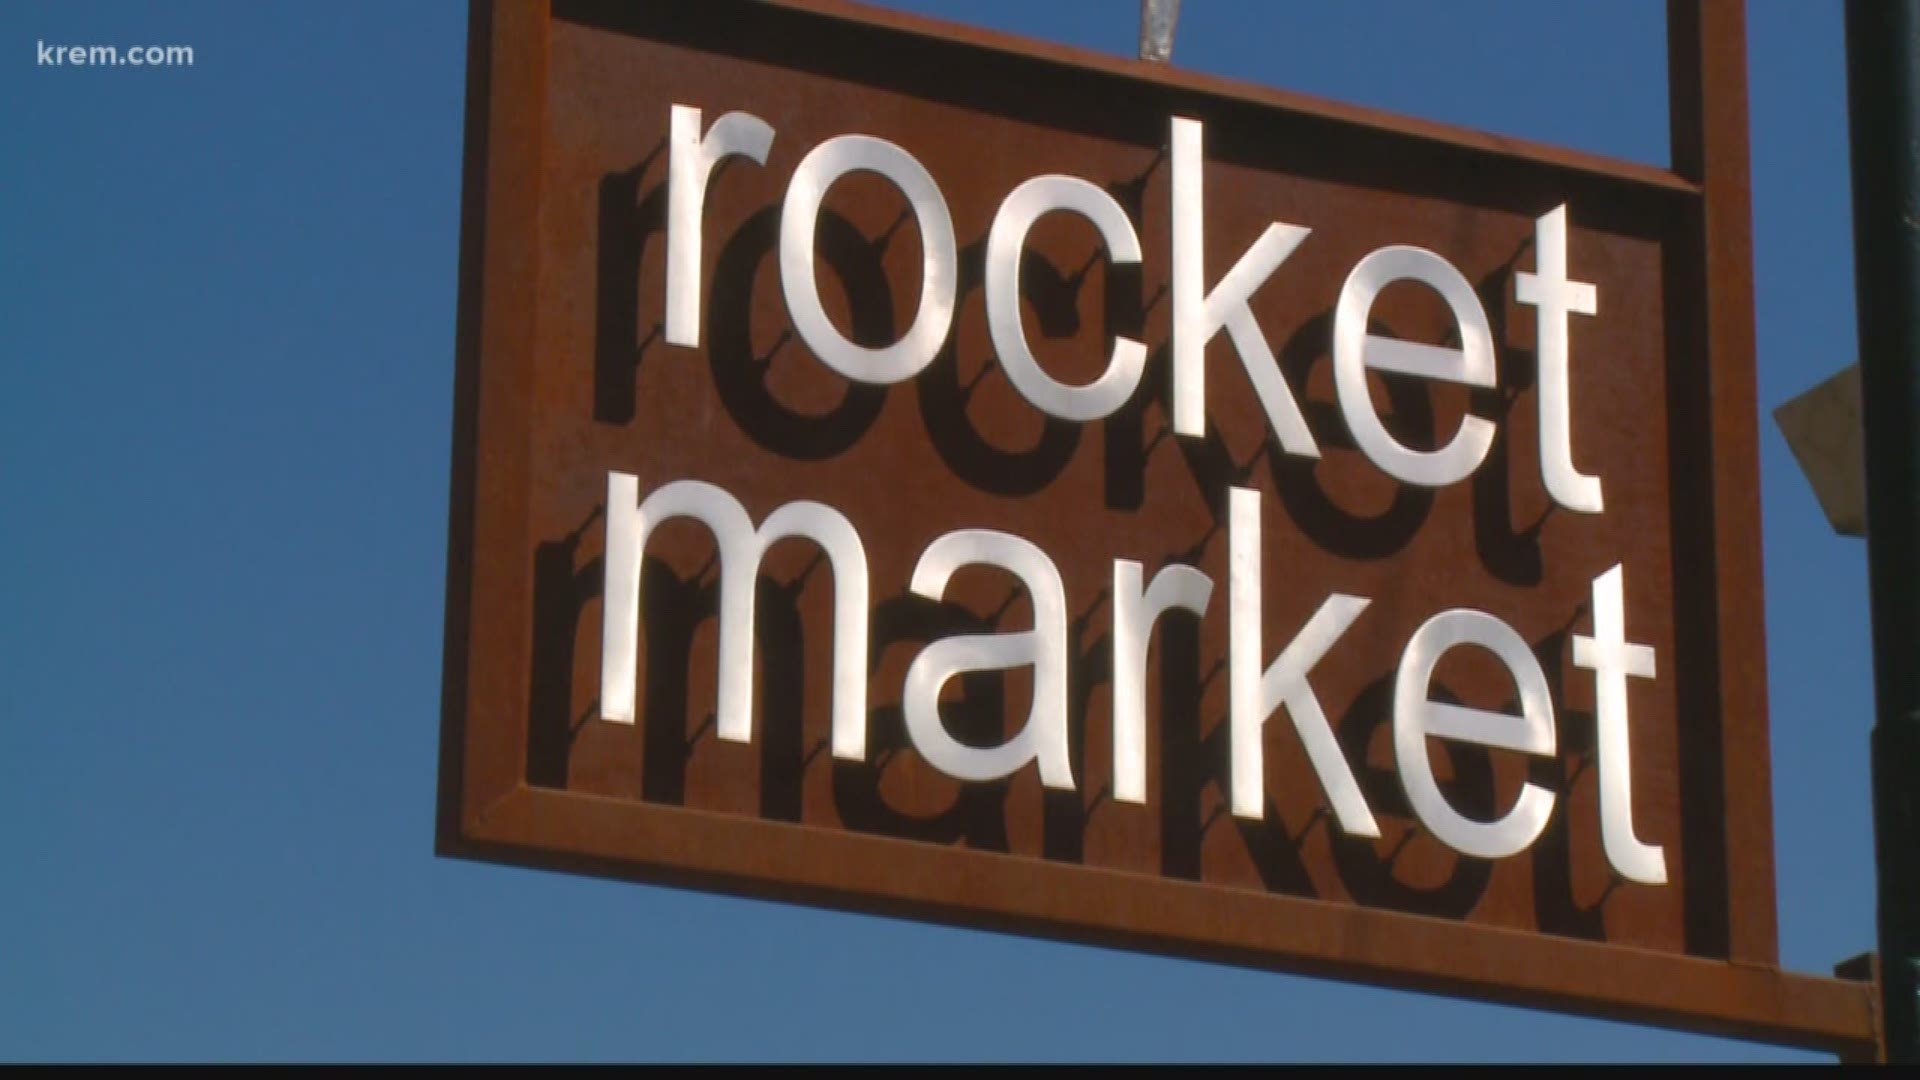 KREM's Dave Somers went to Spokane's Rocket Market to figure out what all the business has to offer.